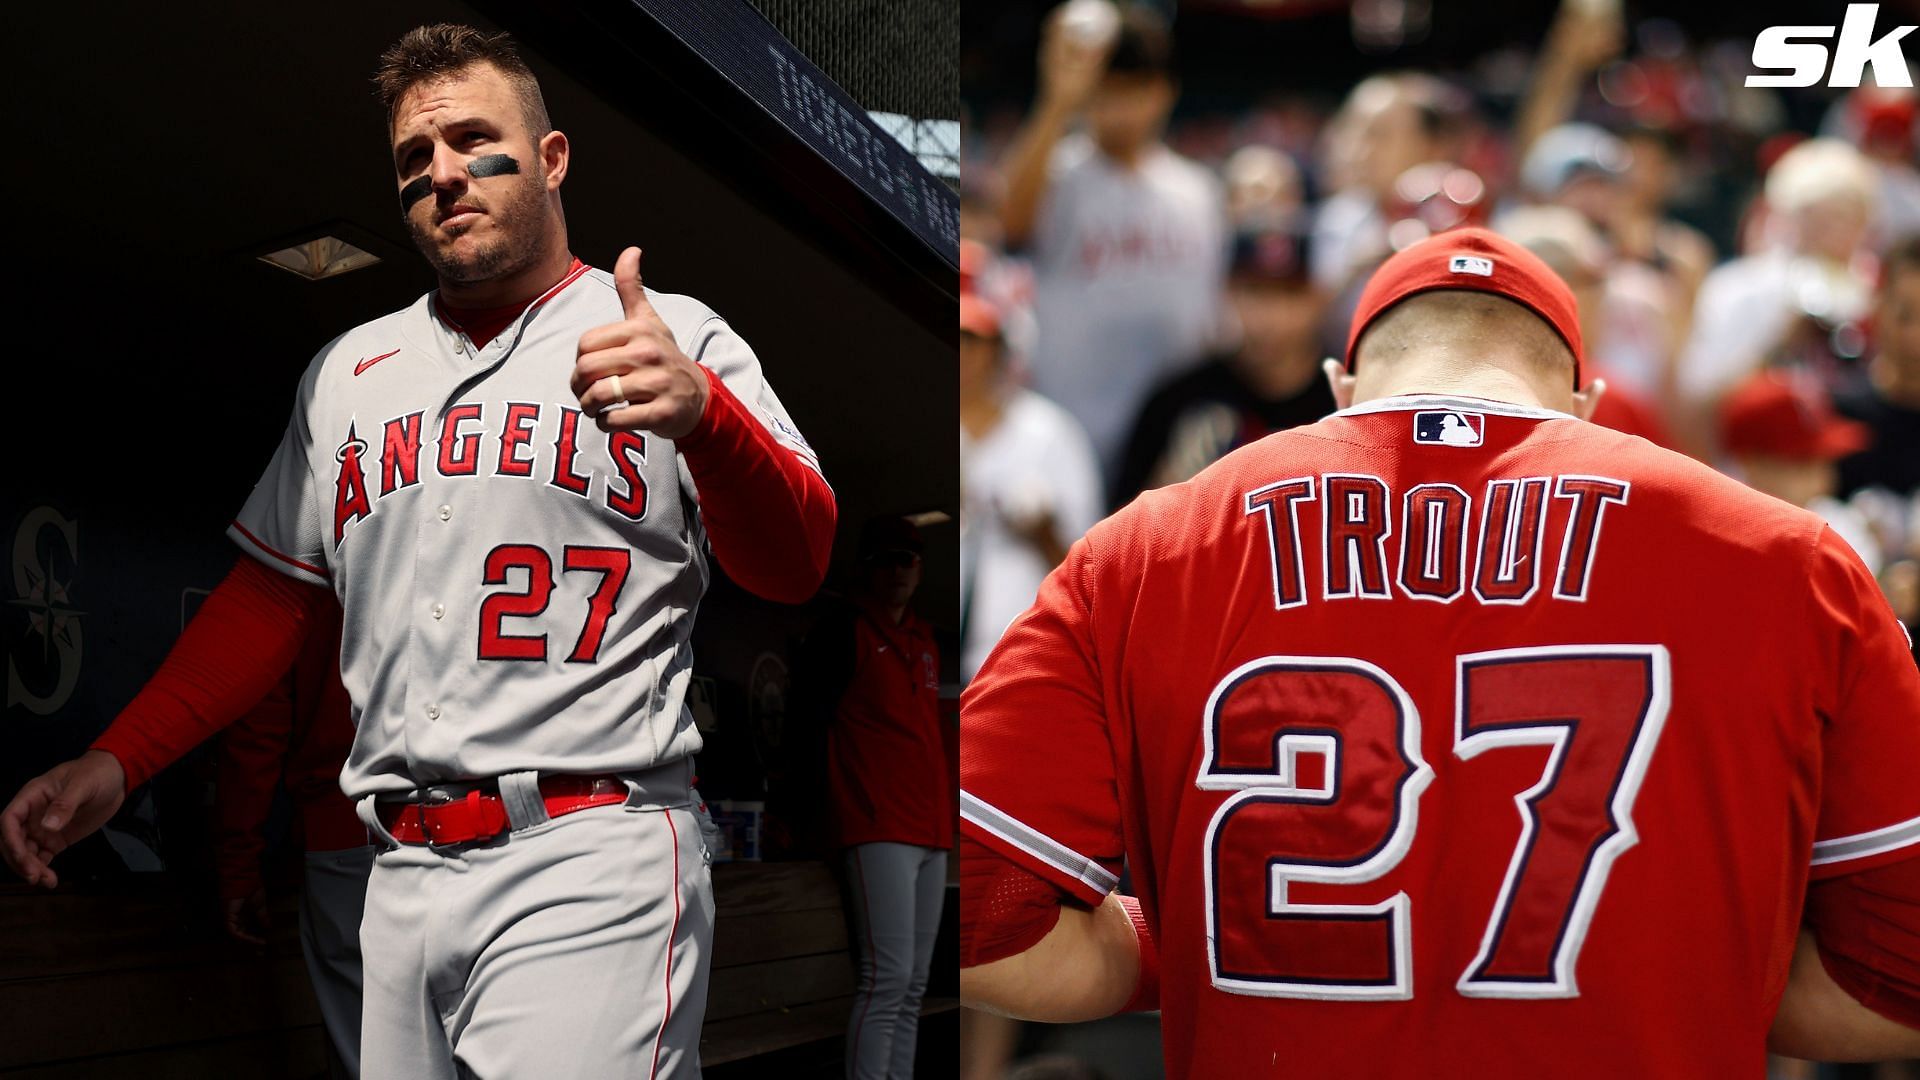 Nike immortalizes Mike Trout